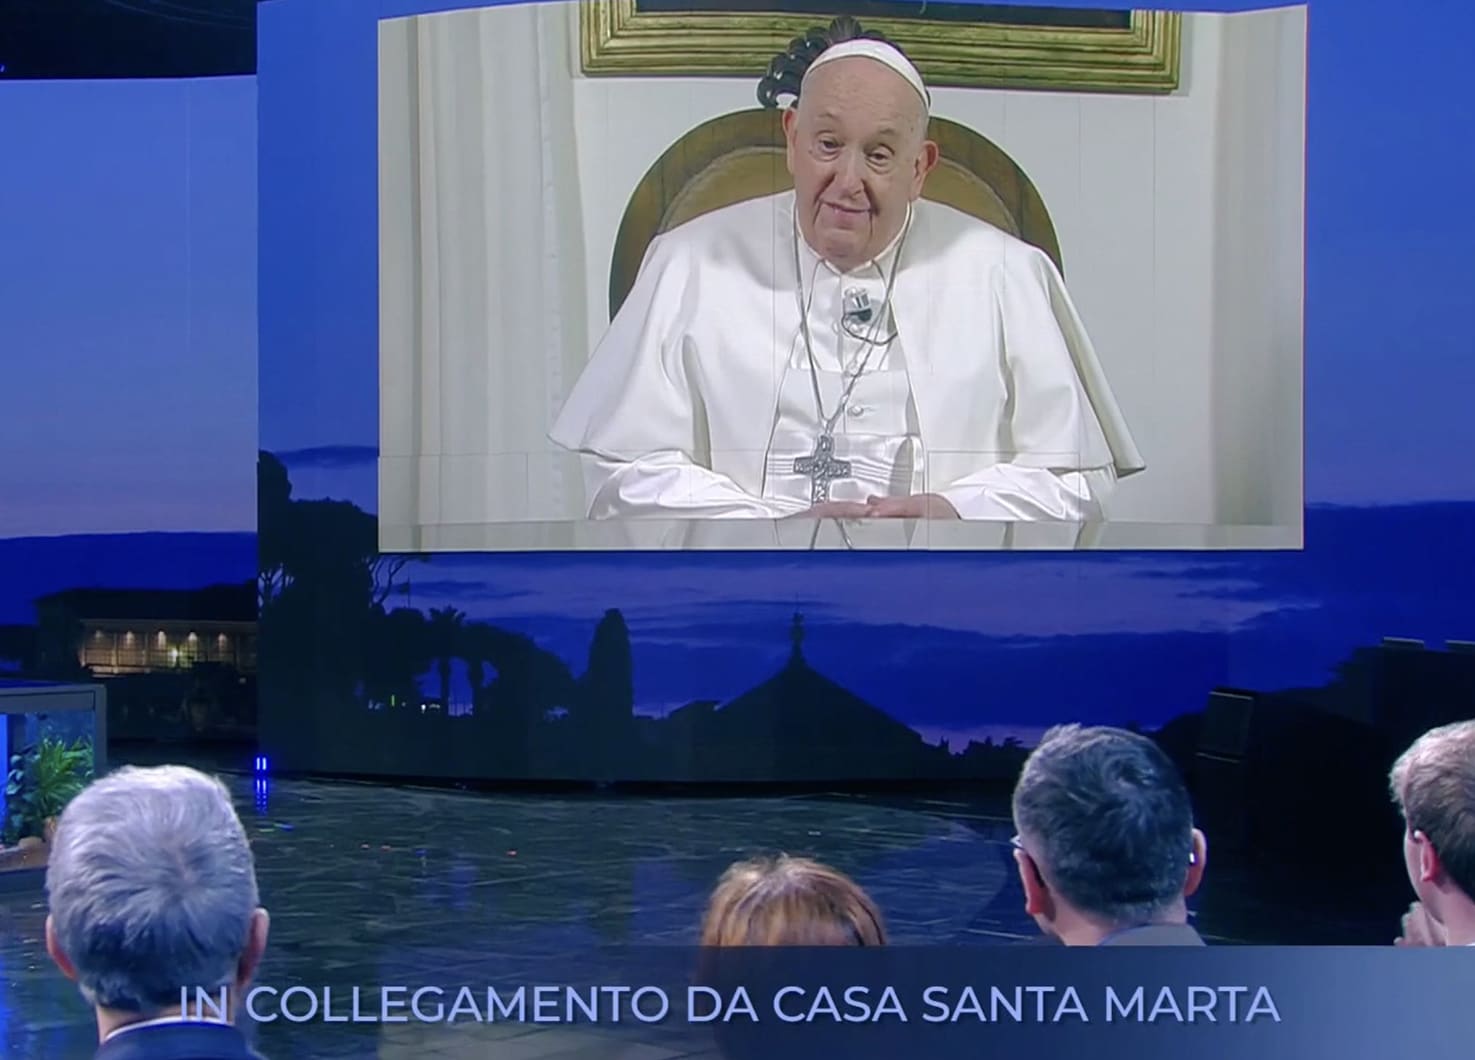 POPE FRANCIS ITALIAN TELEVISION INTERVIEW